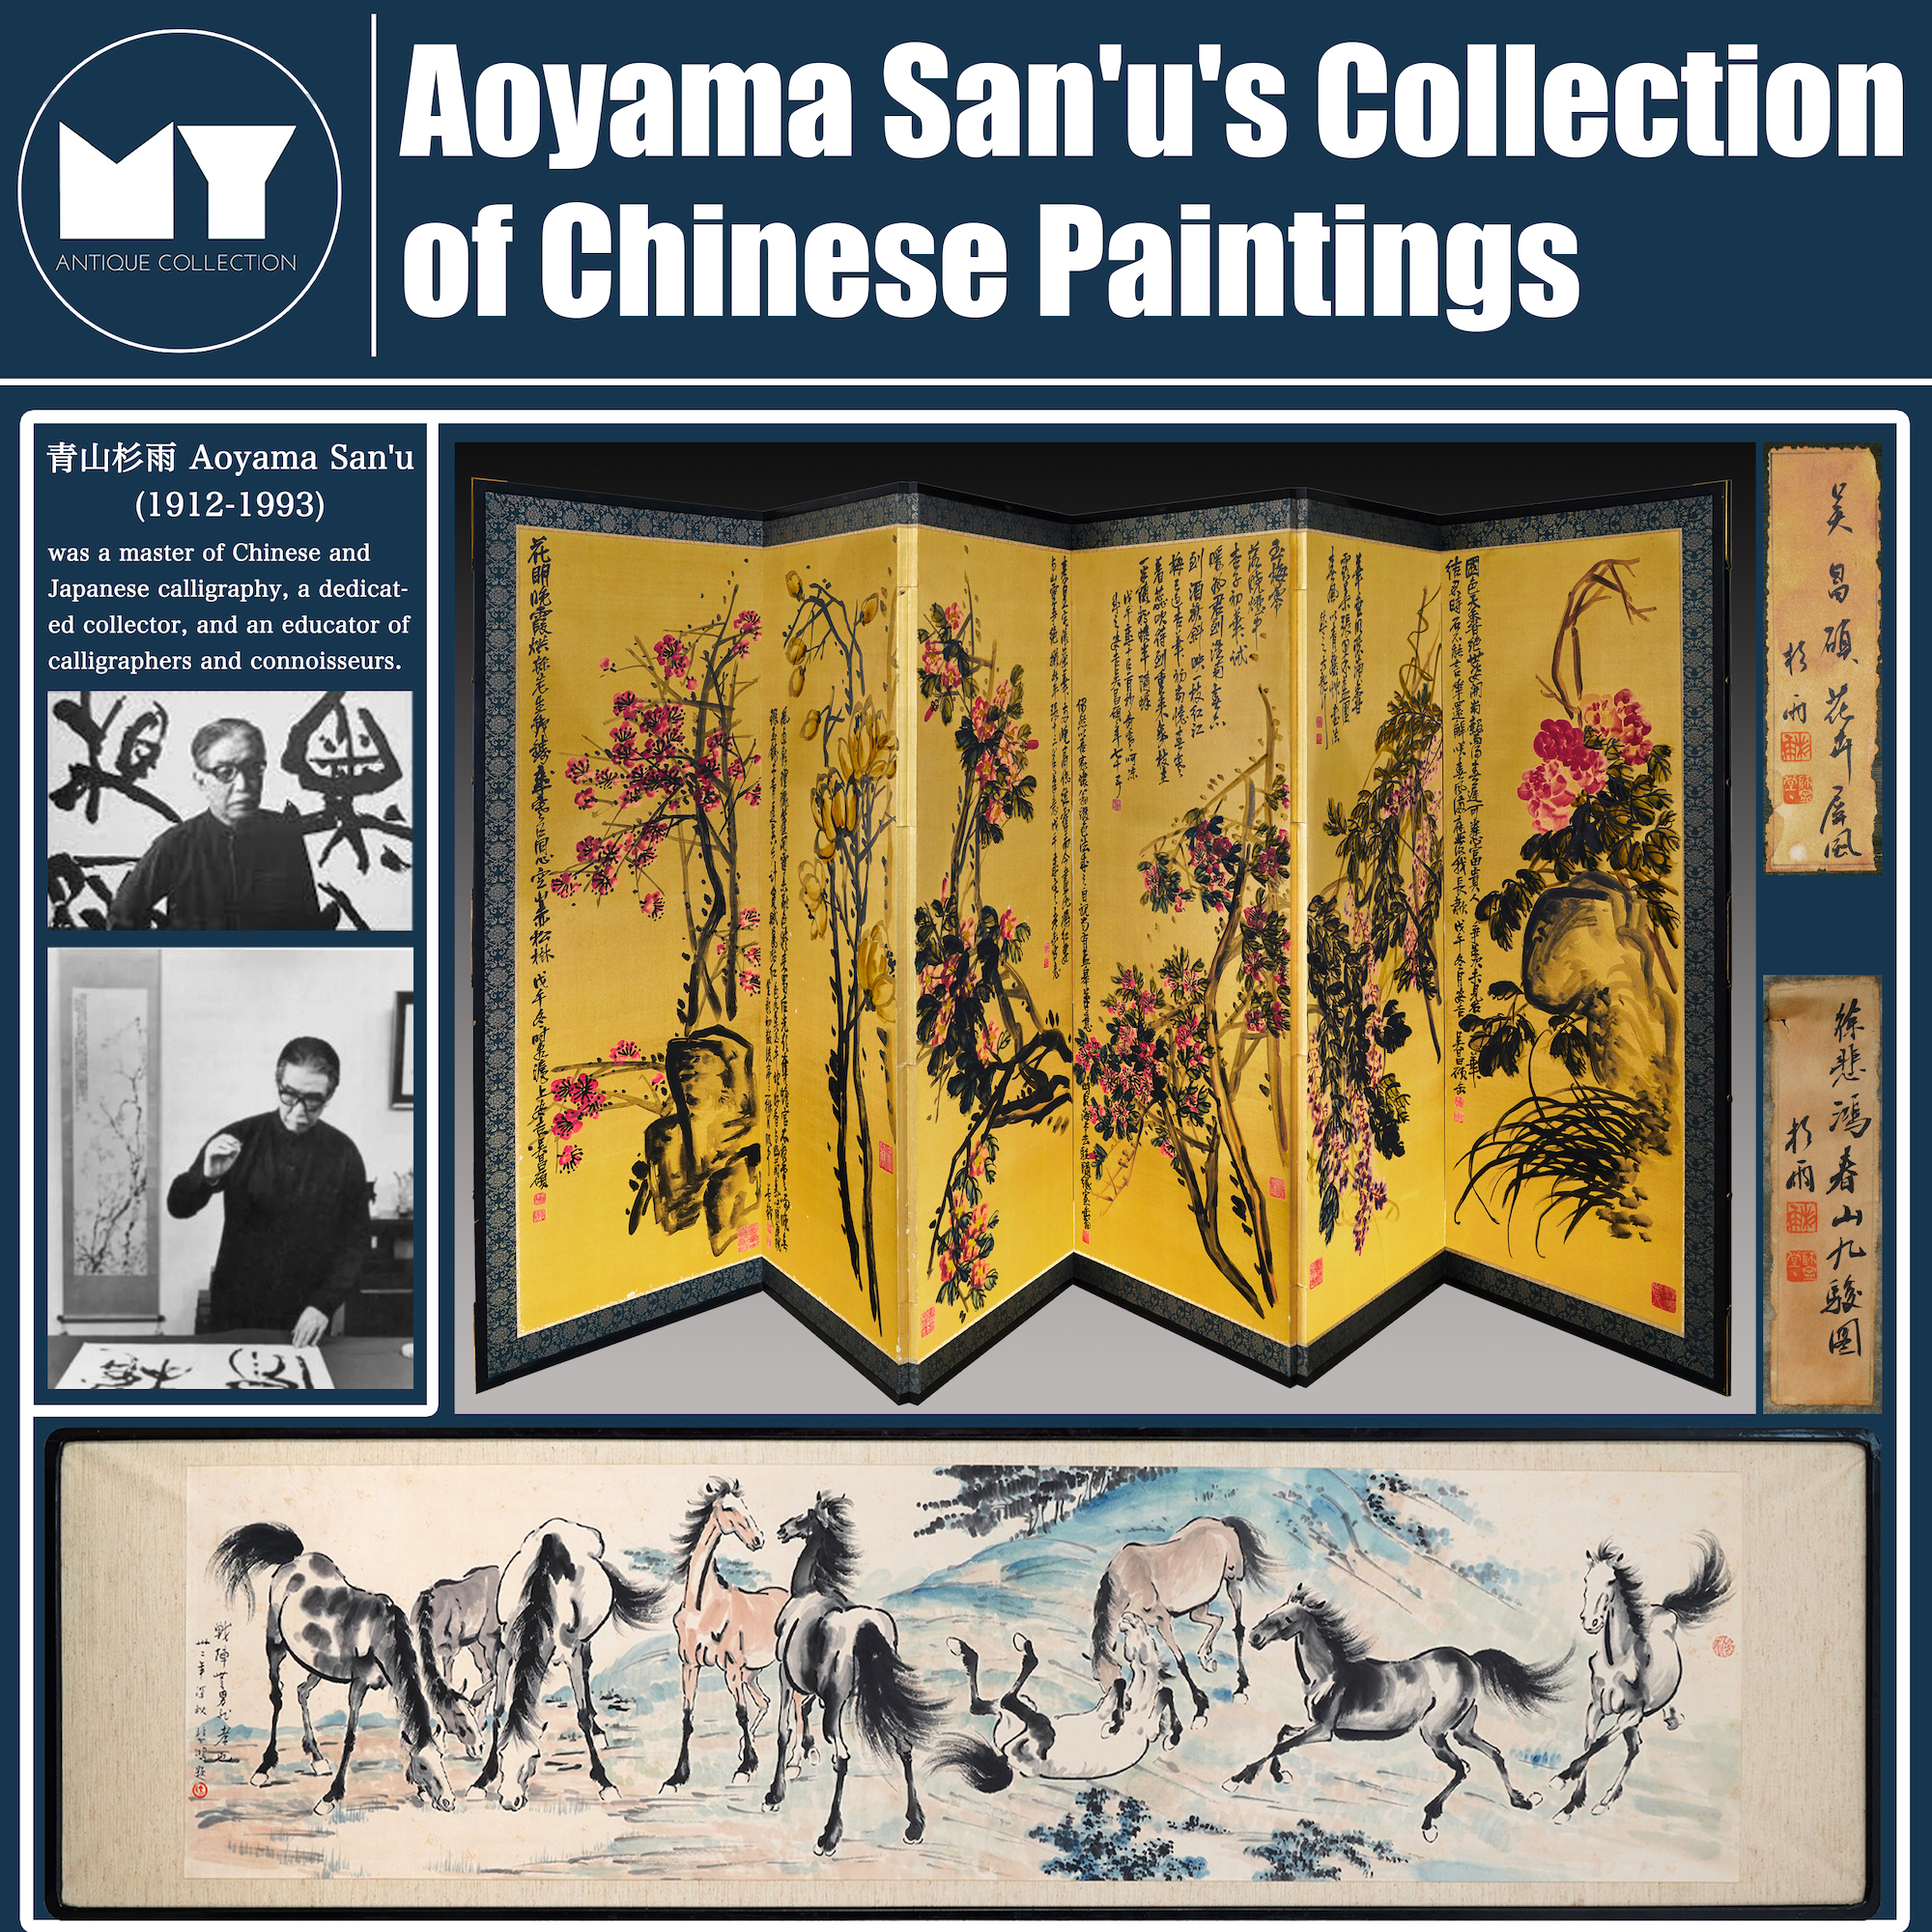 Aoyama San'u's Collection of Chinese Paintings